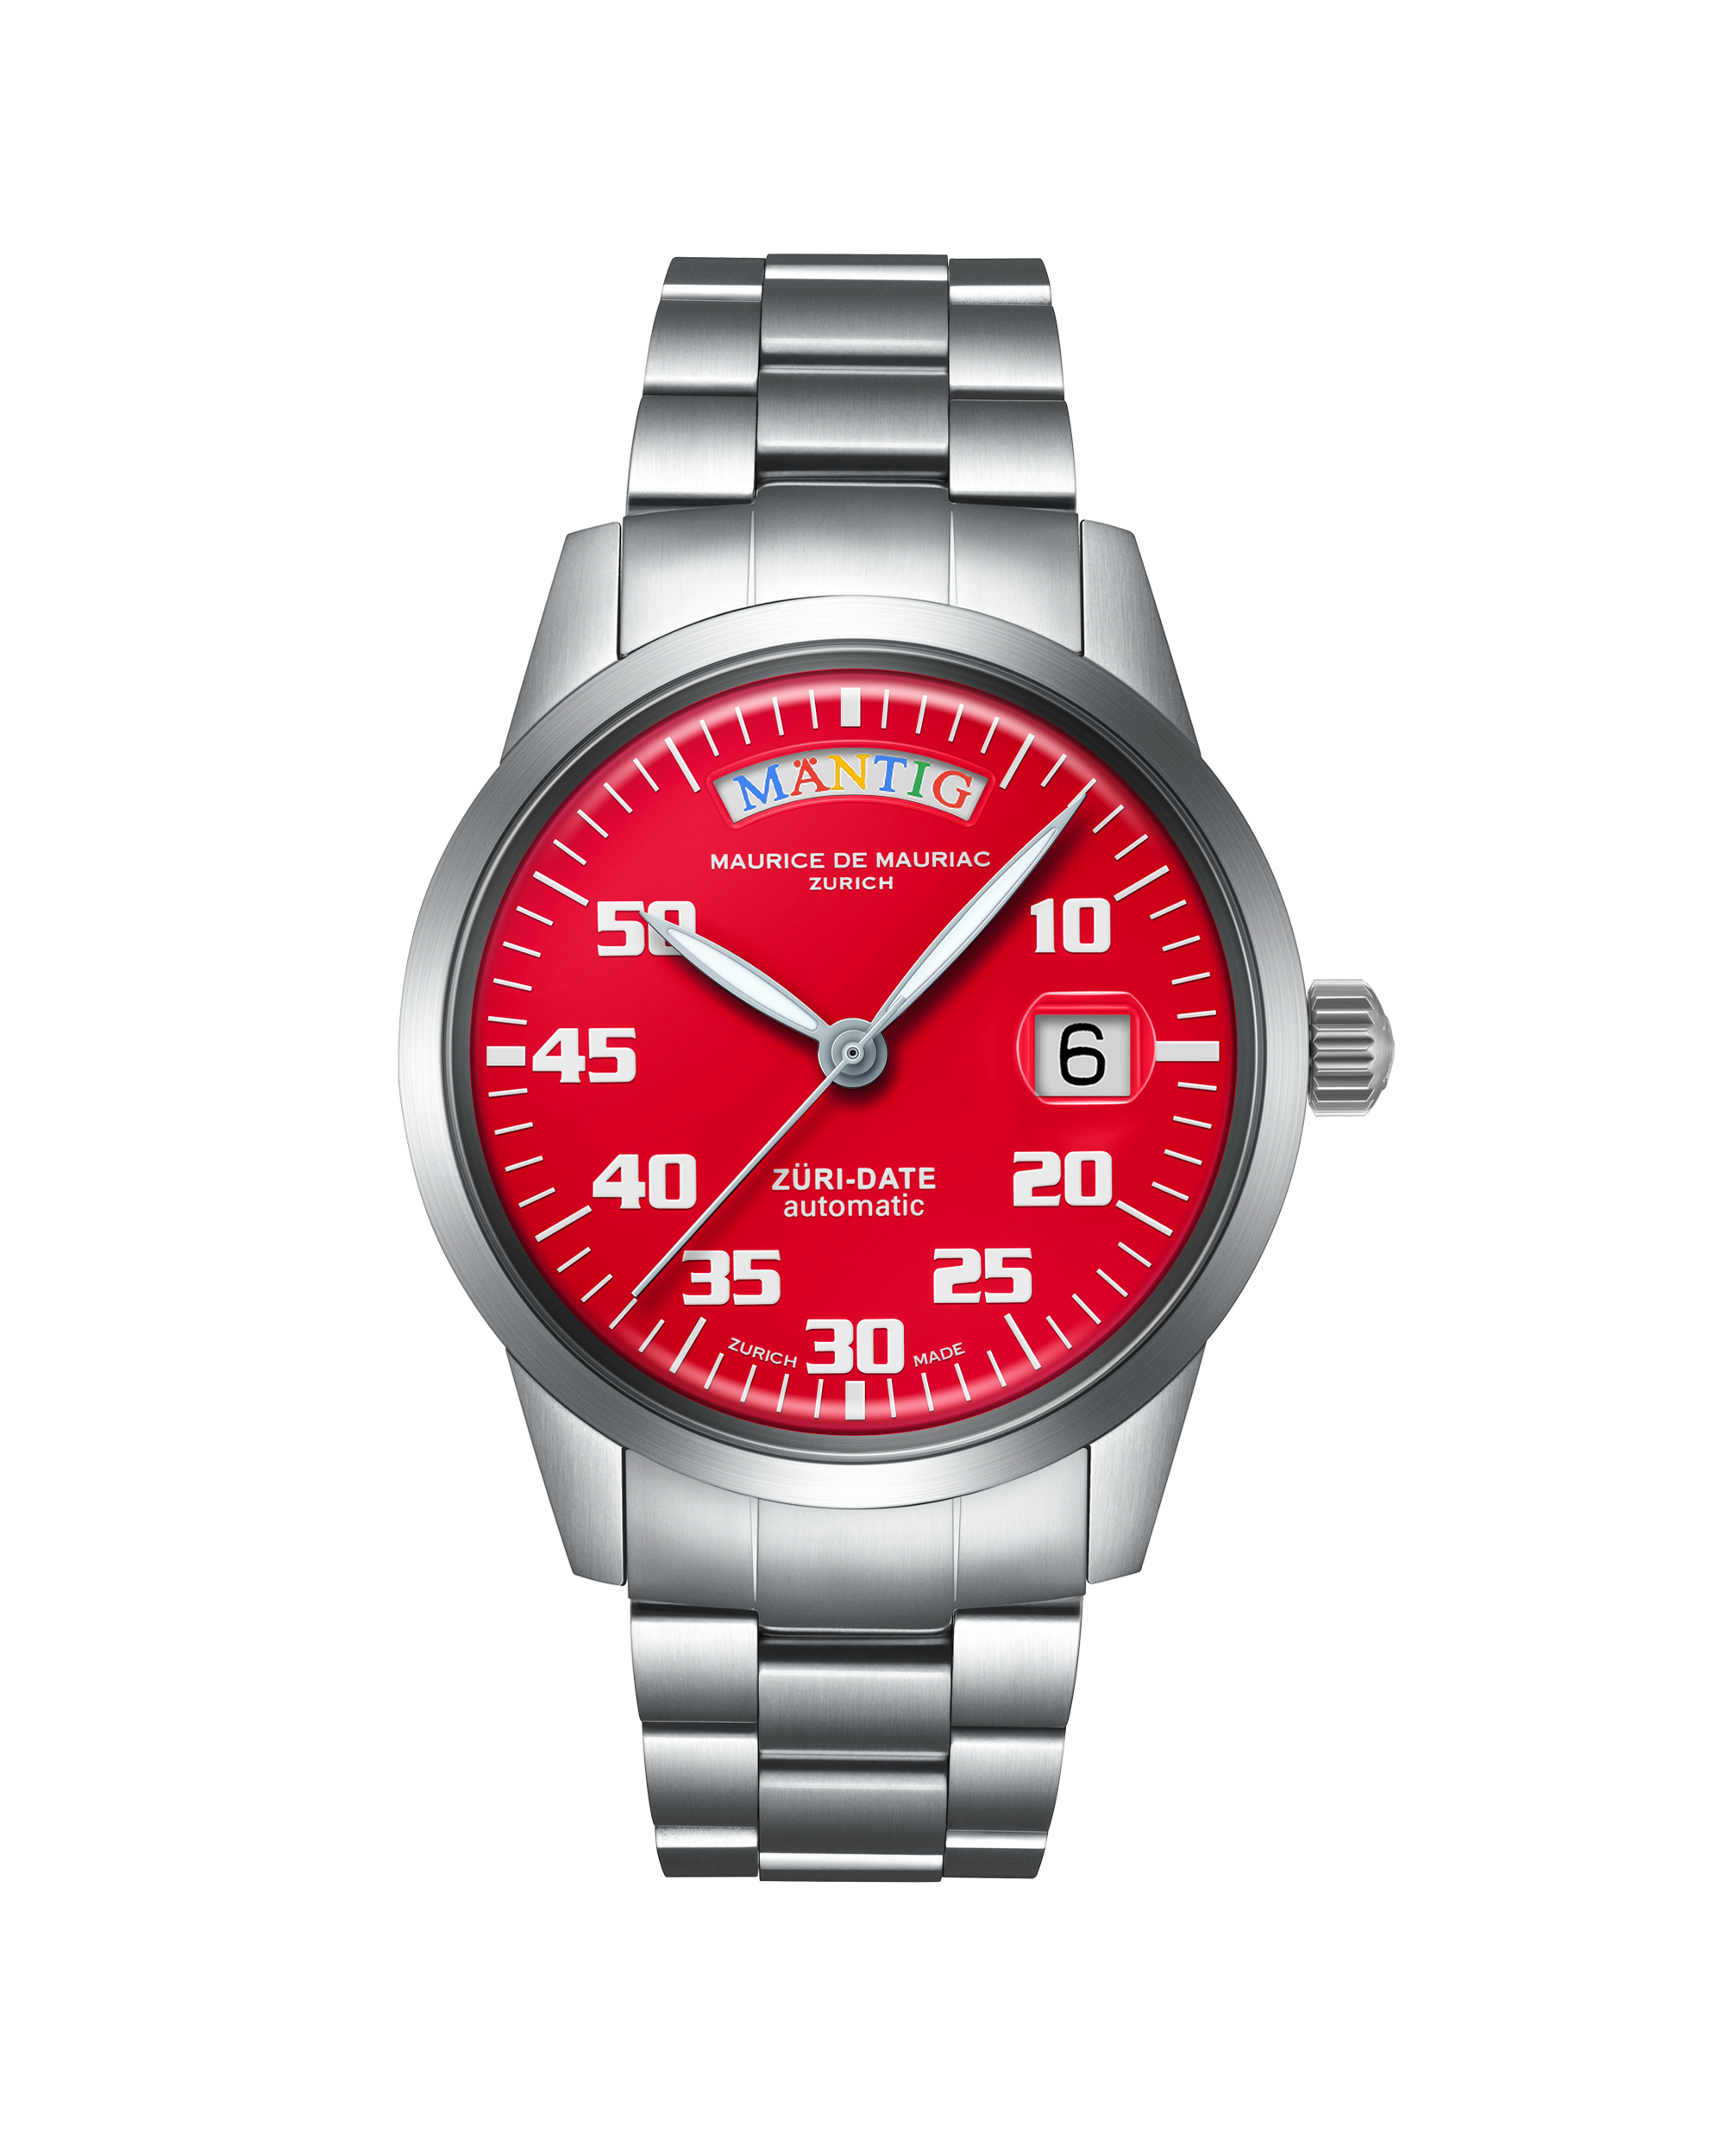 Automatic Modern: “Züri Date” WATCHES@ Limited Edition RED